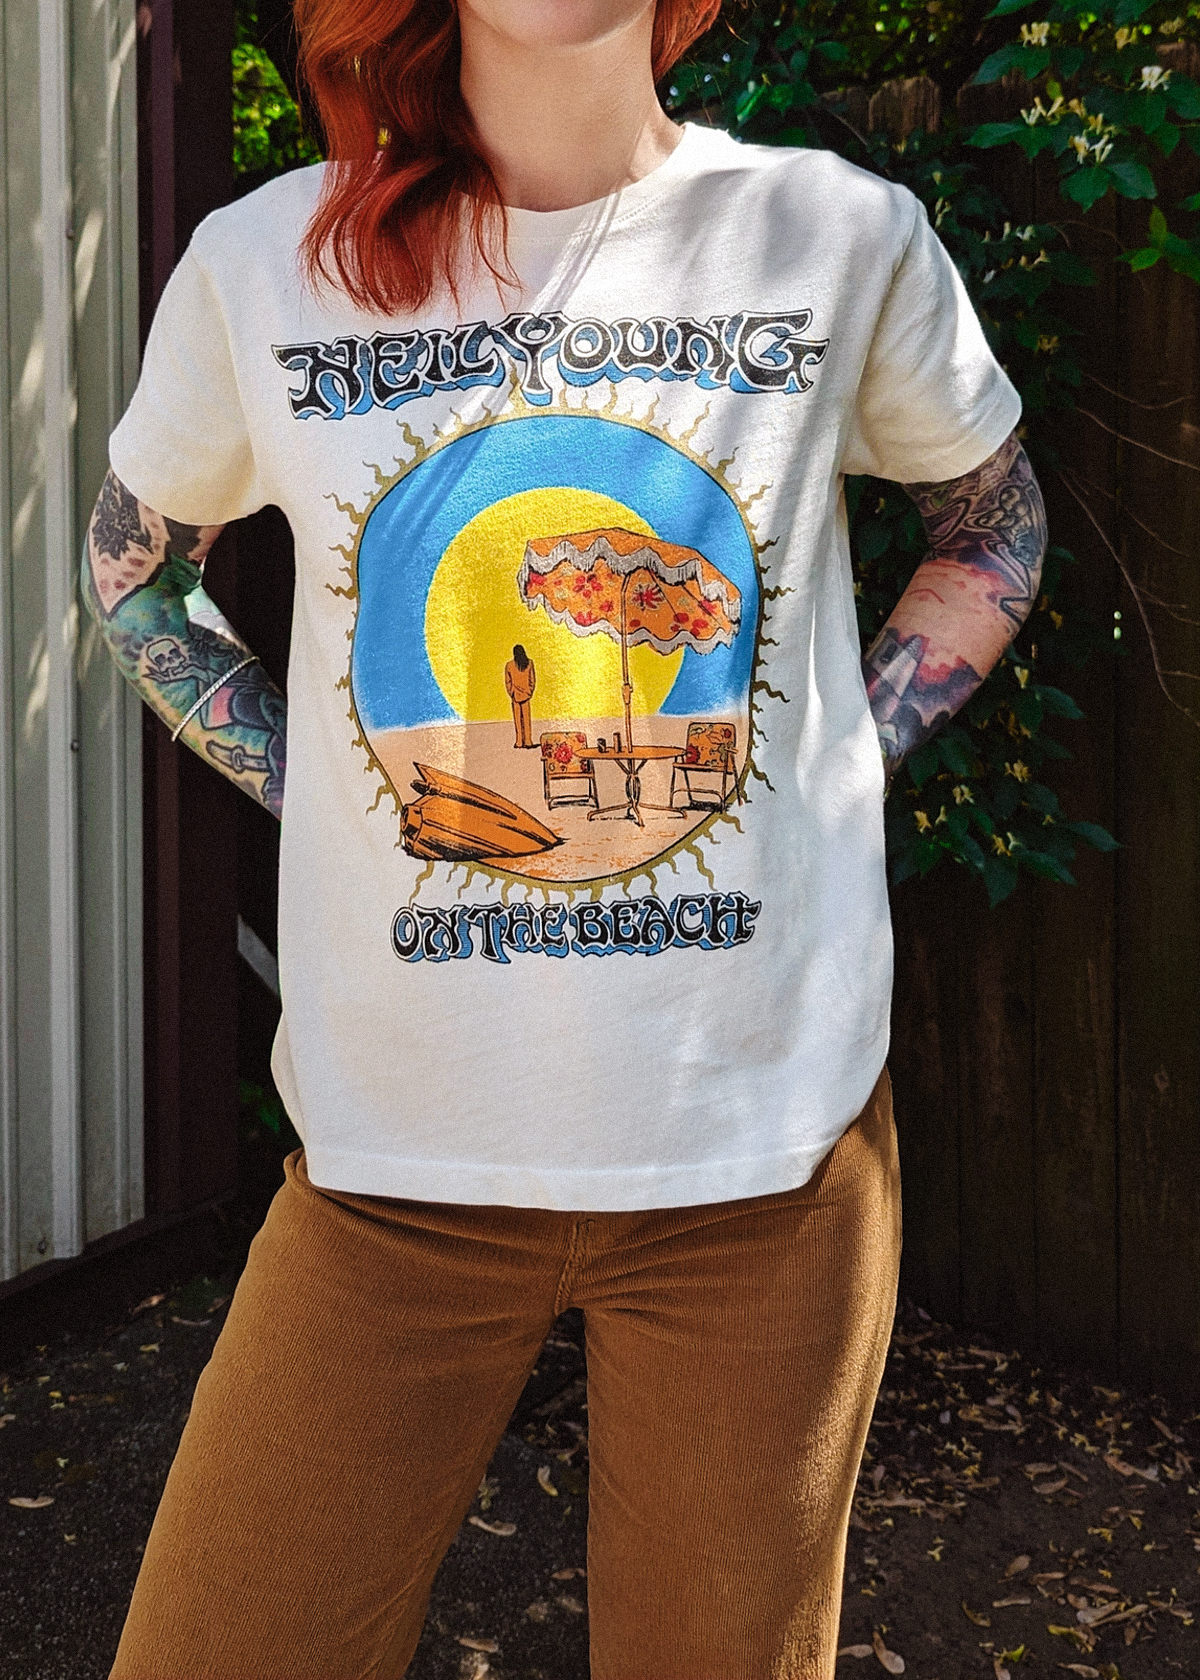 Neil Young On The Beach Tee by Daydreamer LA - made in California, USA, and officially licensed